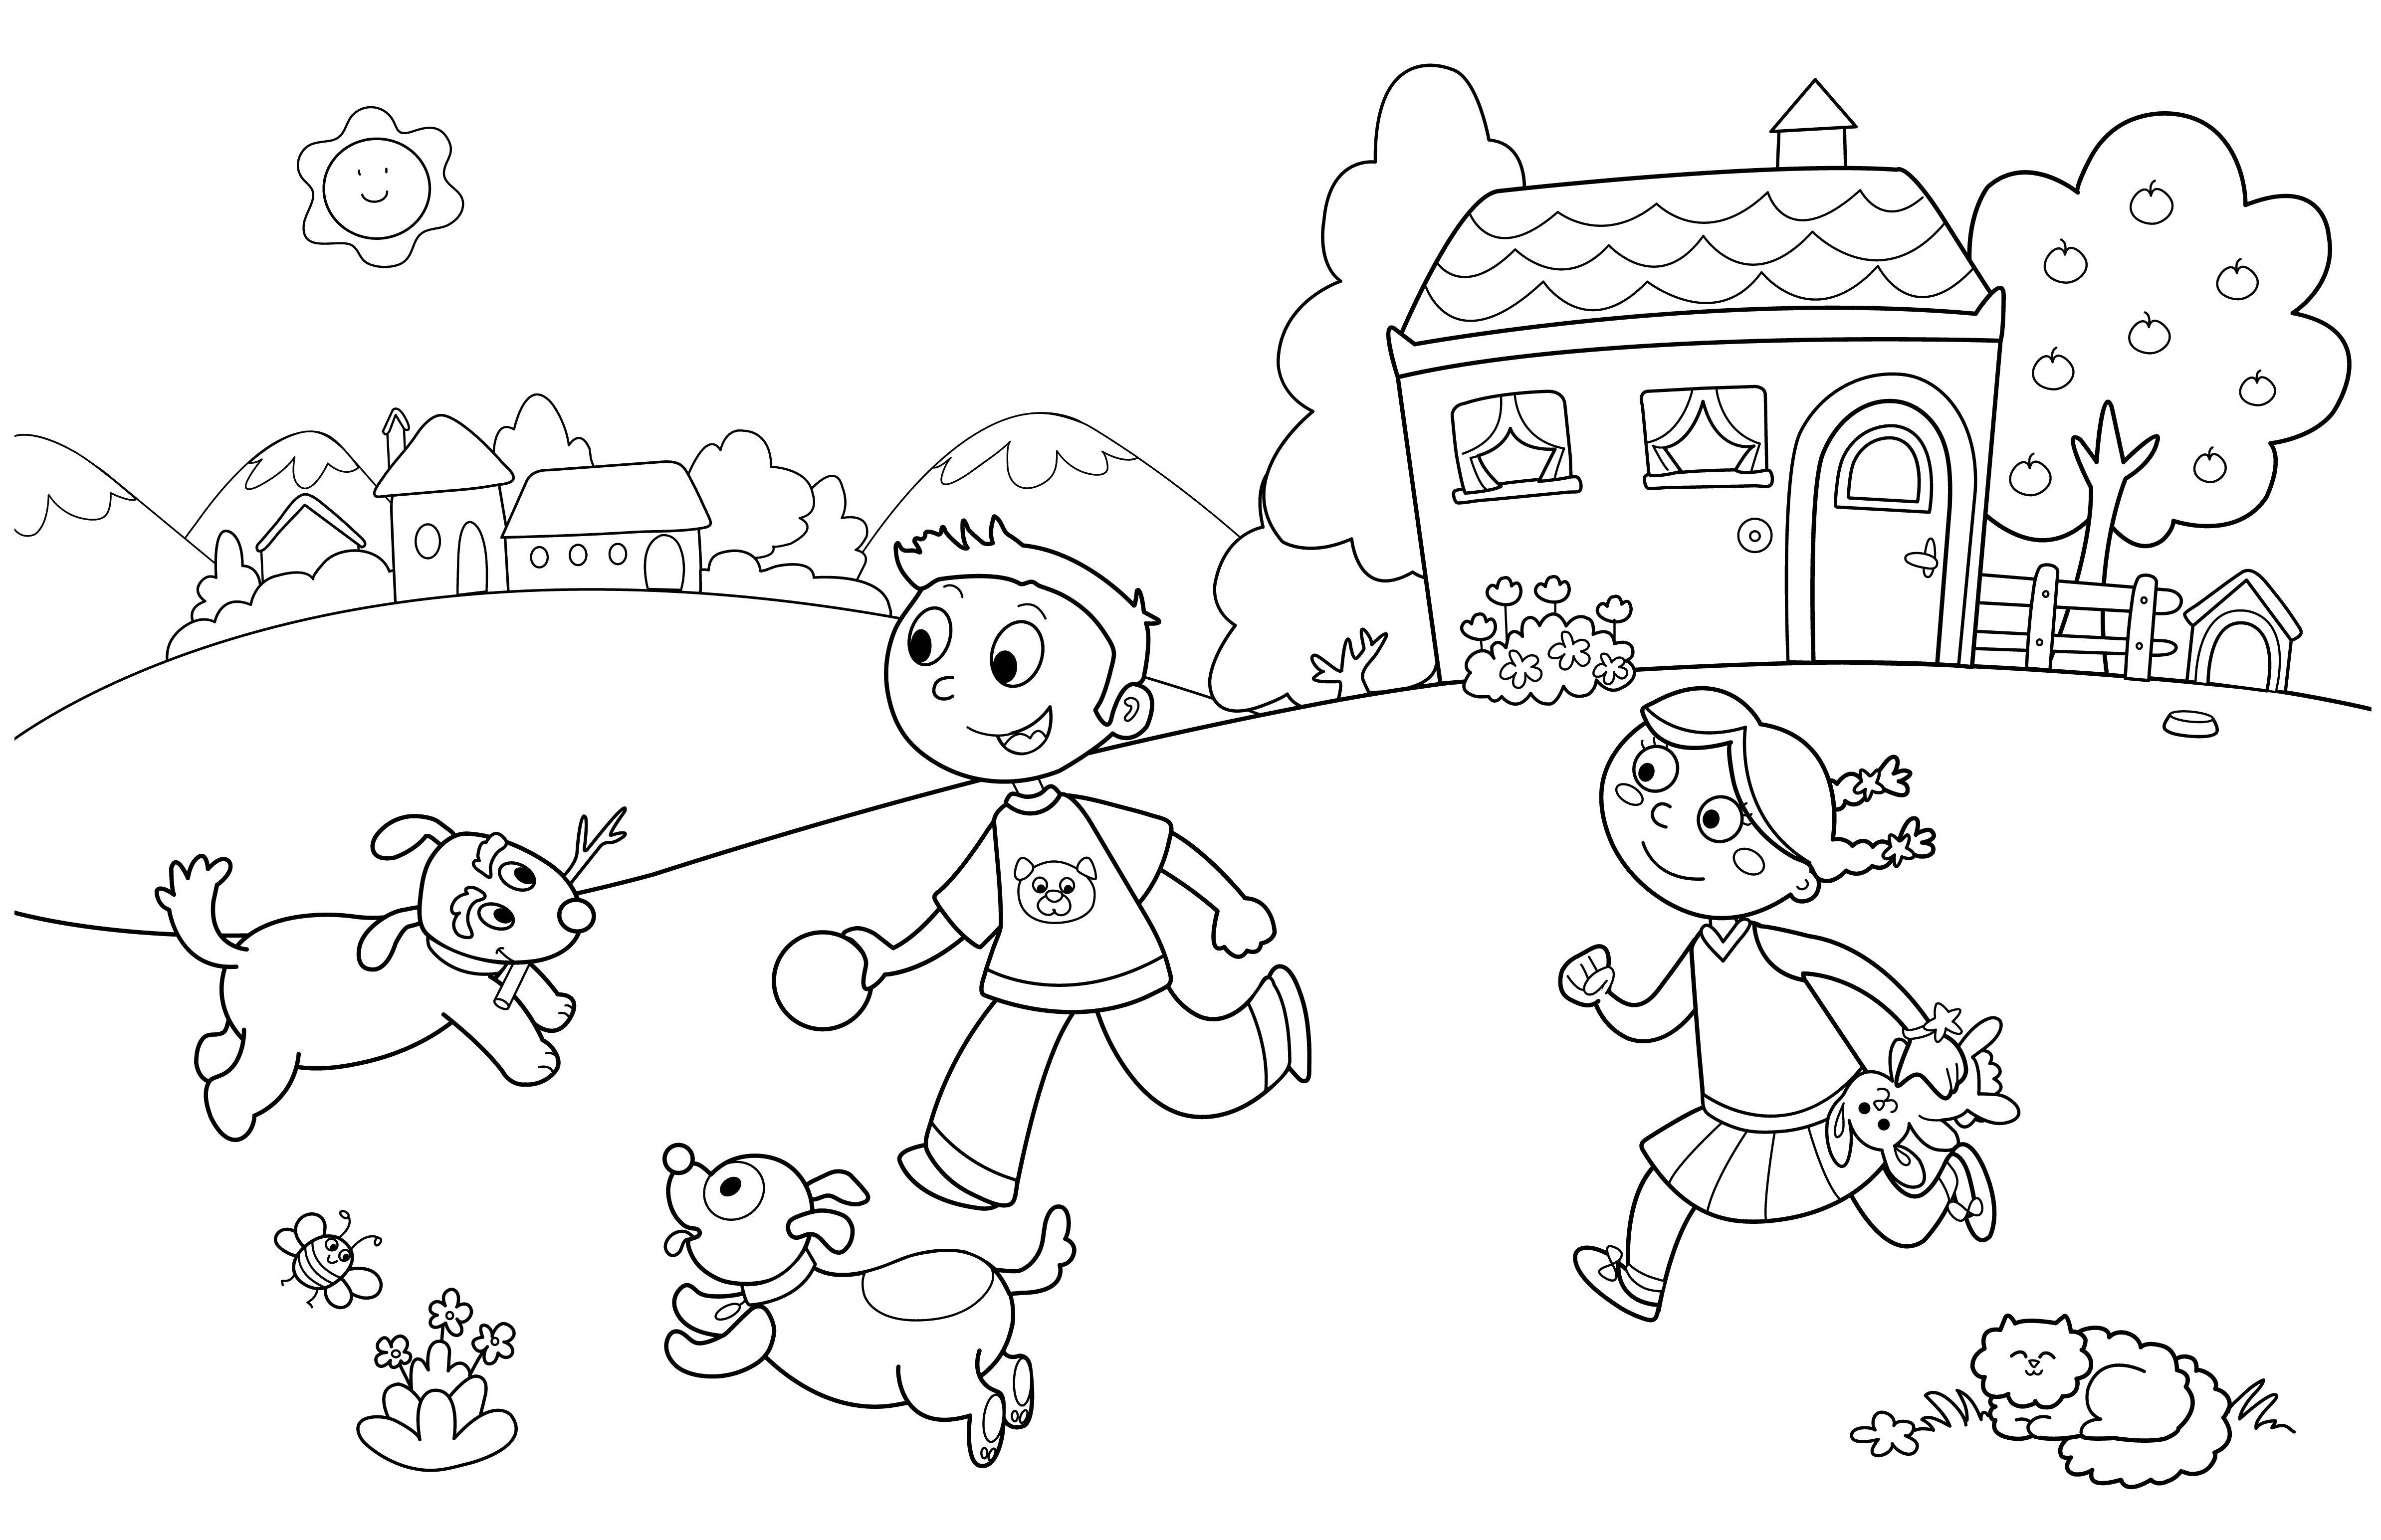 Coloring Fun kids with dogs. Category children. Tags:  Children, animals, games.